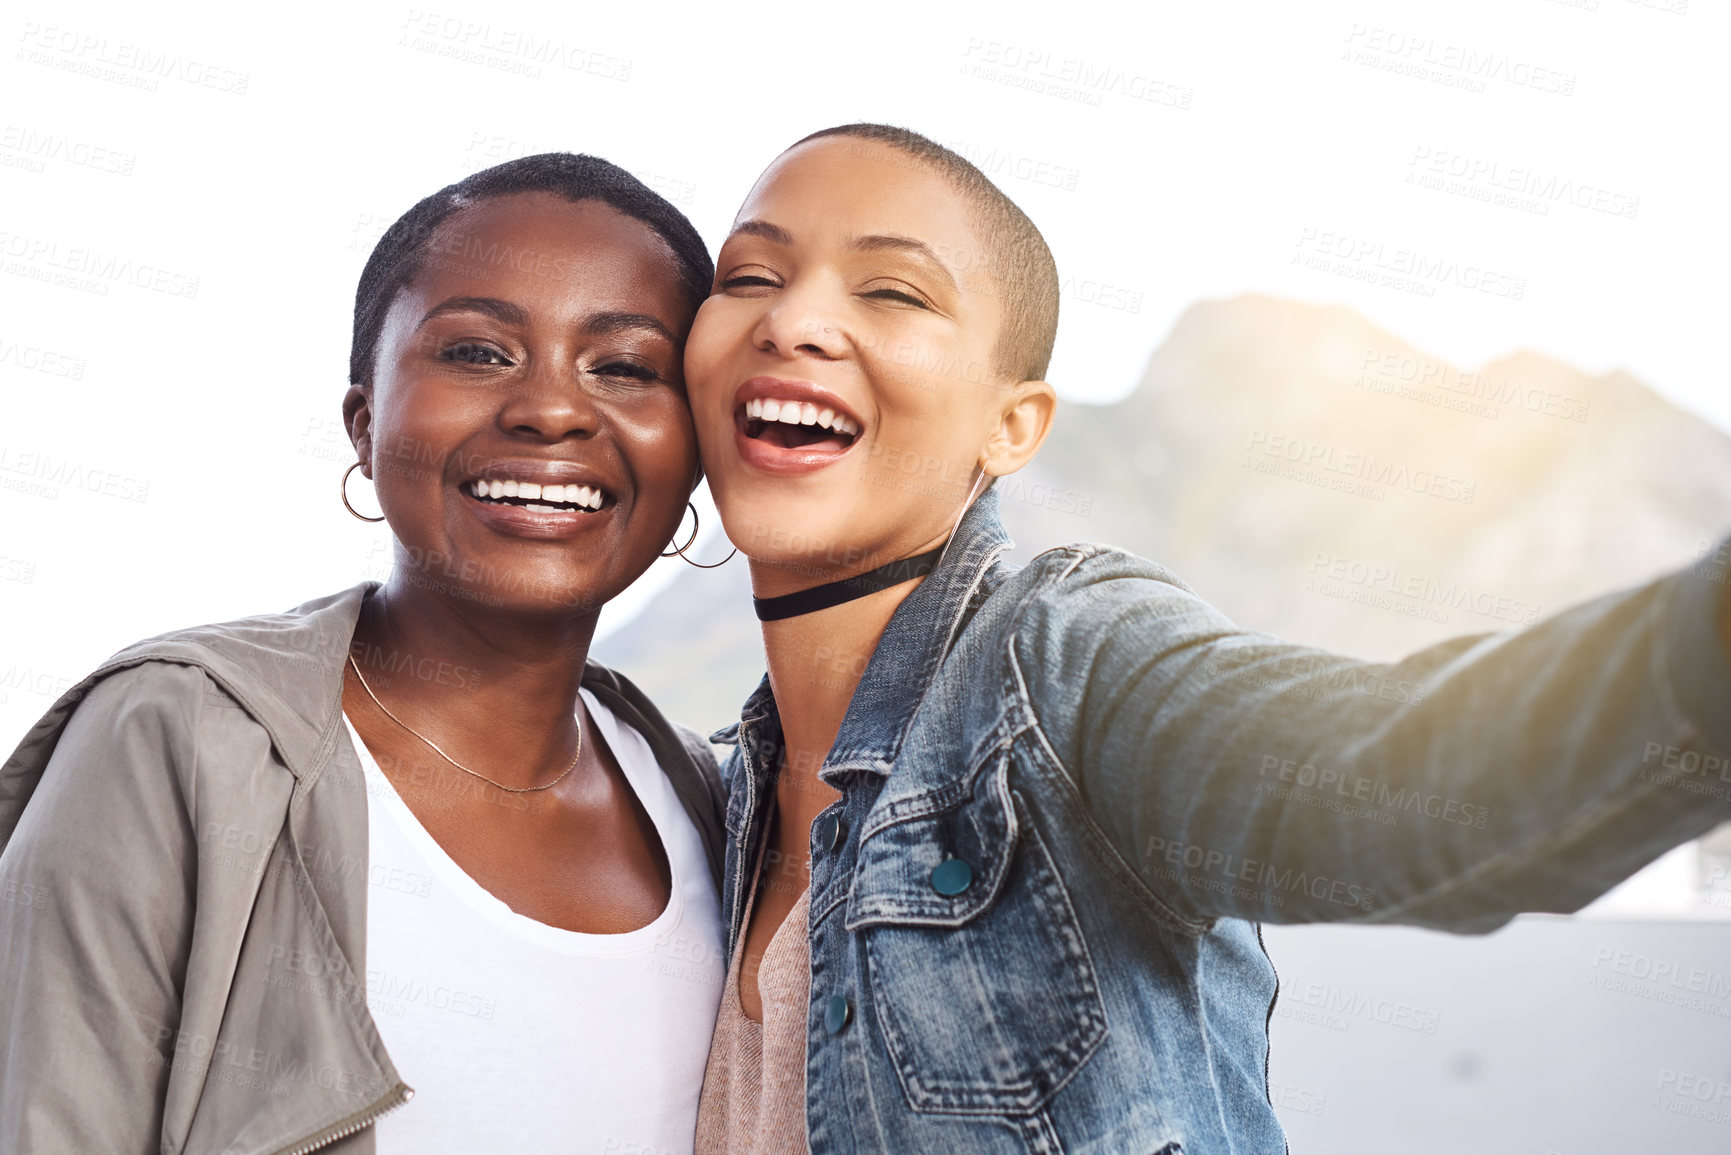 Buy stock photo Portrait of two young women smiling and posing while taking a selfie in the city